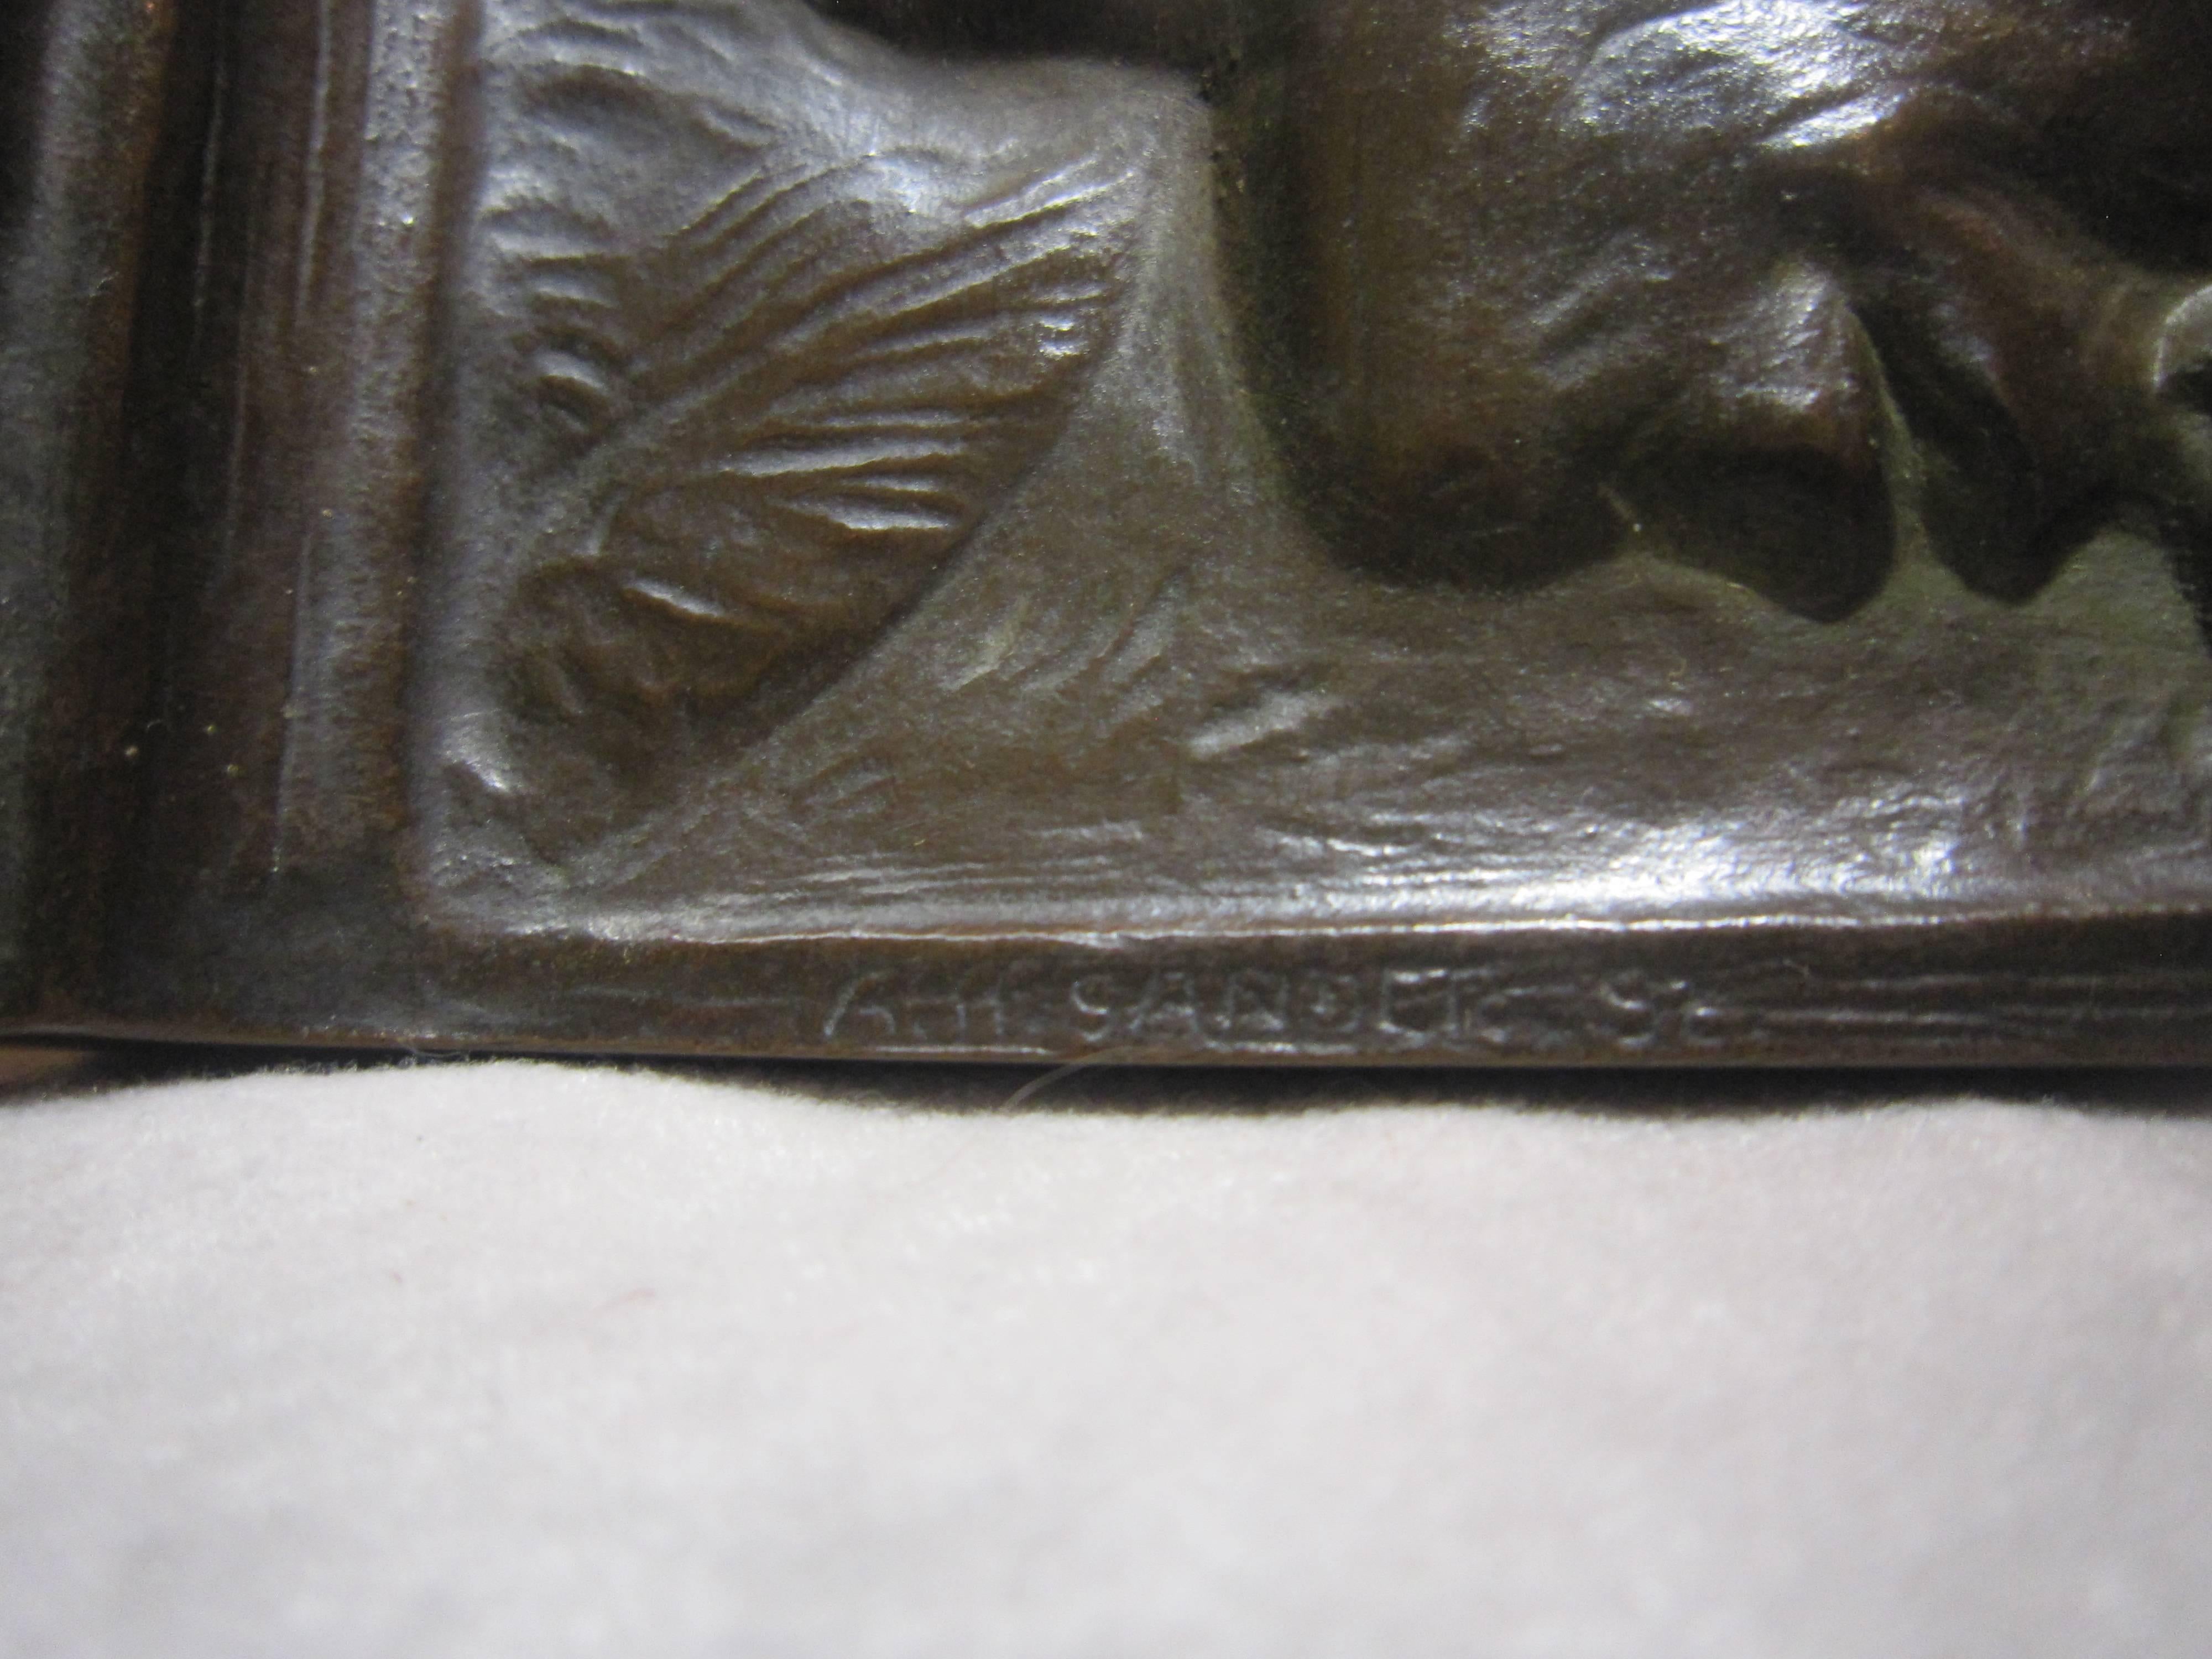 These richly patinated and well cast bronze bookends are artist signed and bear the foundry mark 